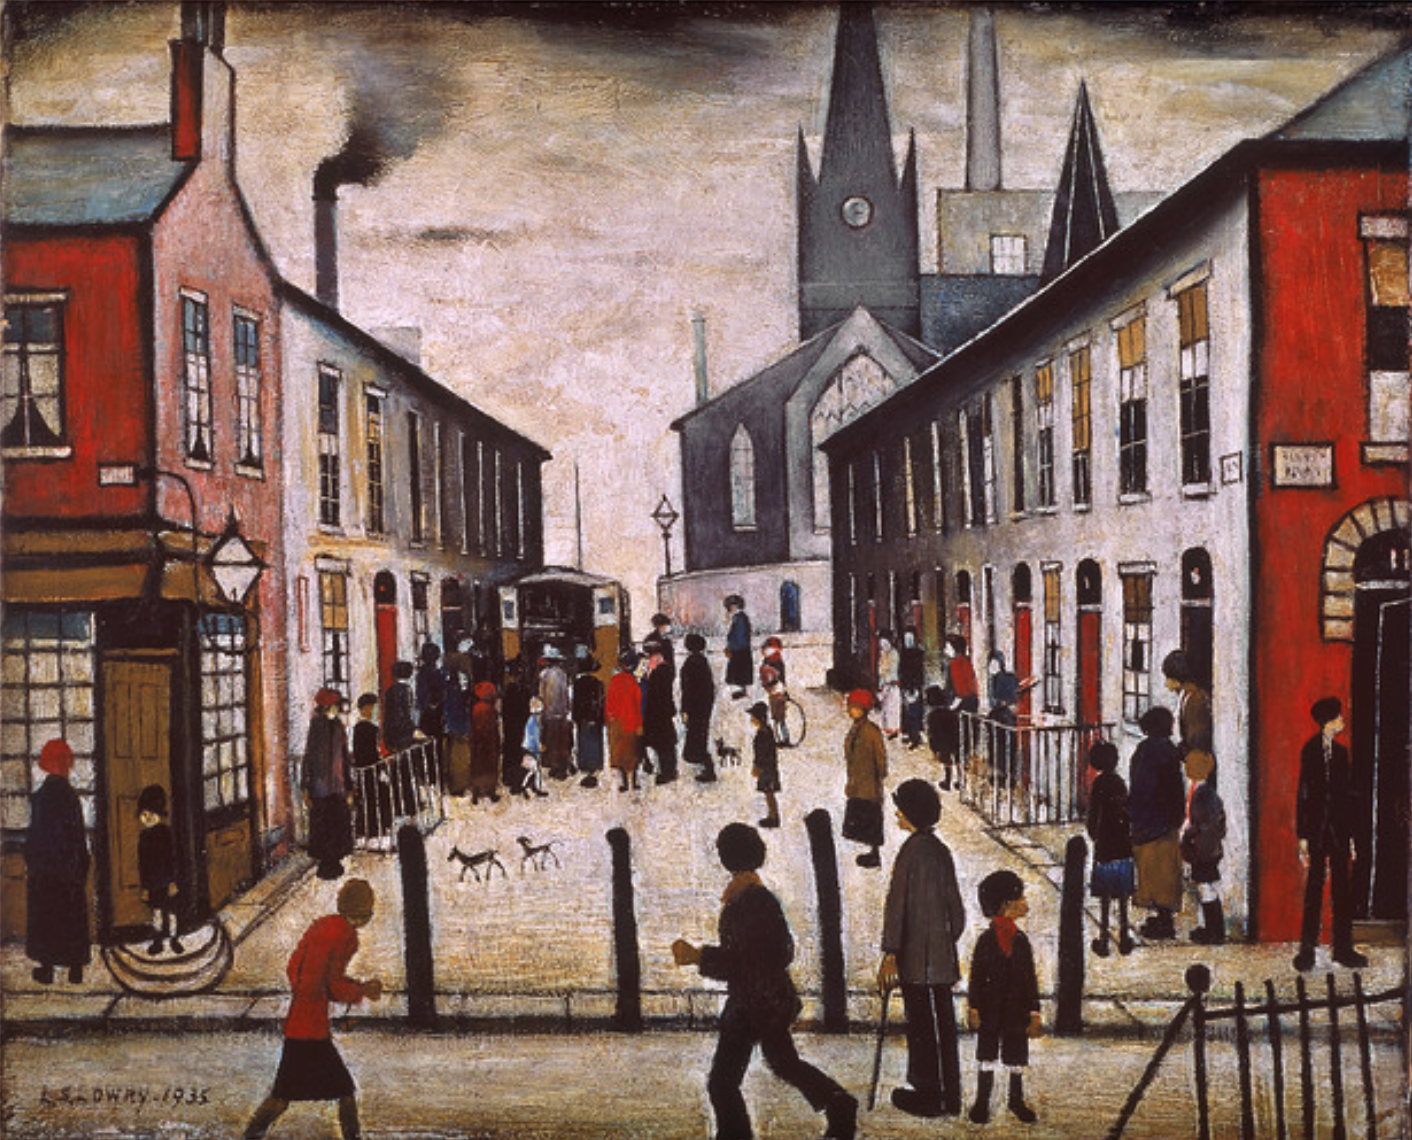 The Fever Van (1935) by Laurence Stephen Lowry (1887 - 1976), English artist.